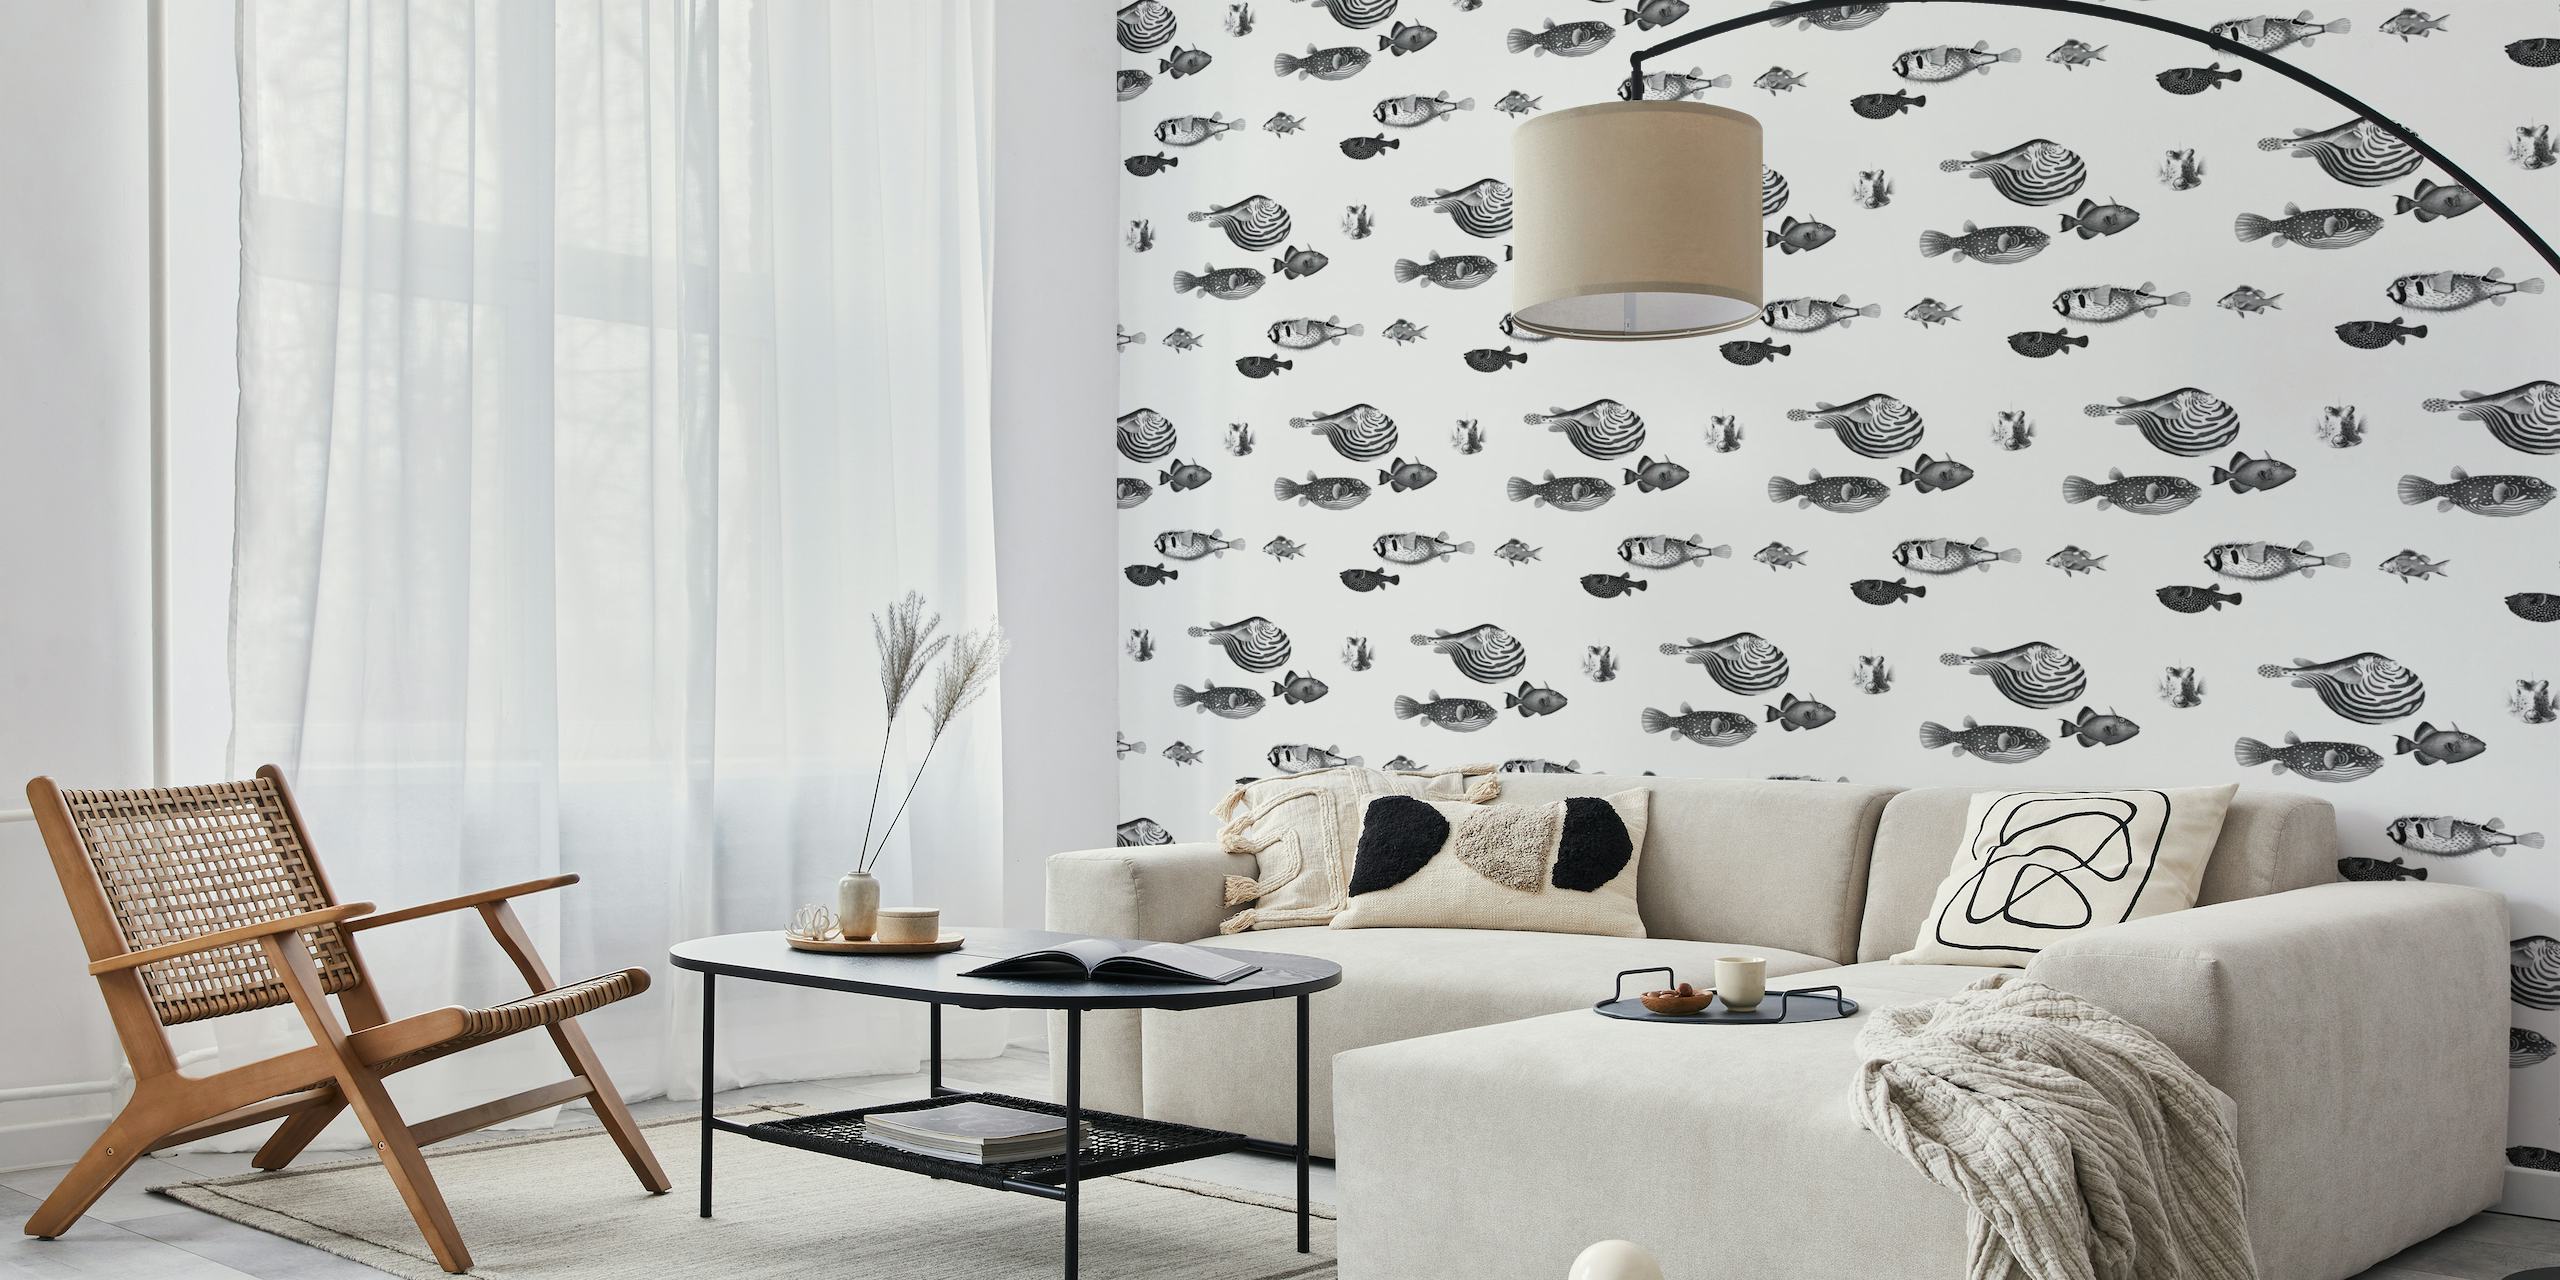 Black and white Acquario Fish pattern wall mural with various species